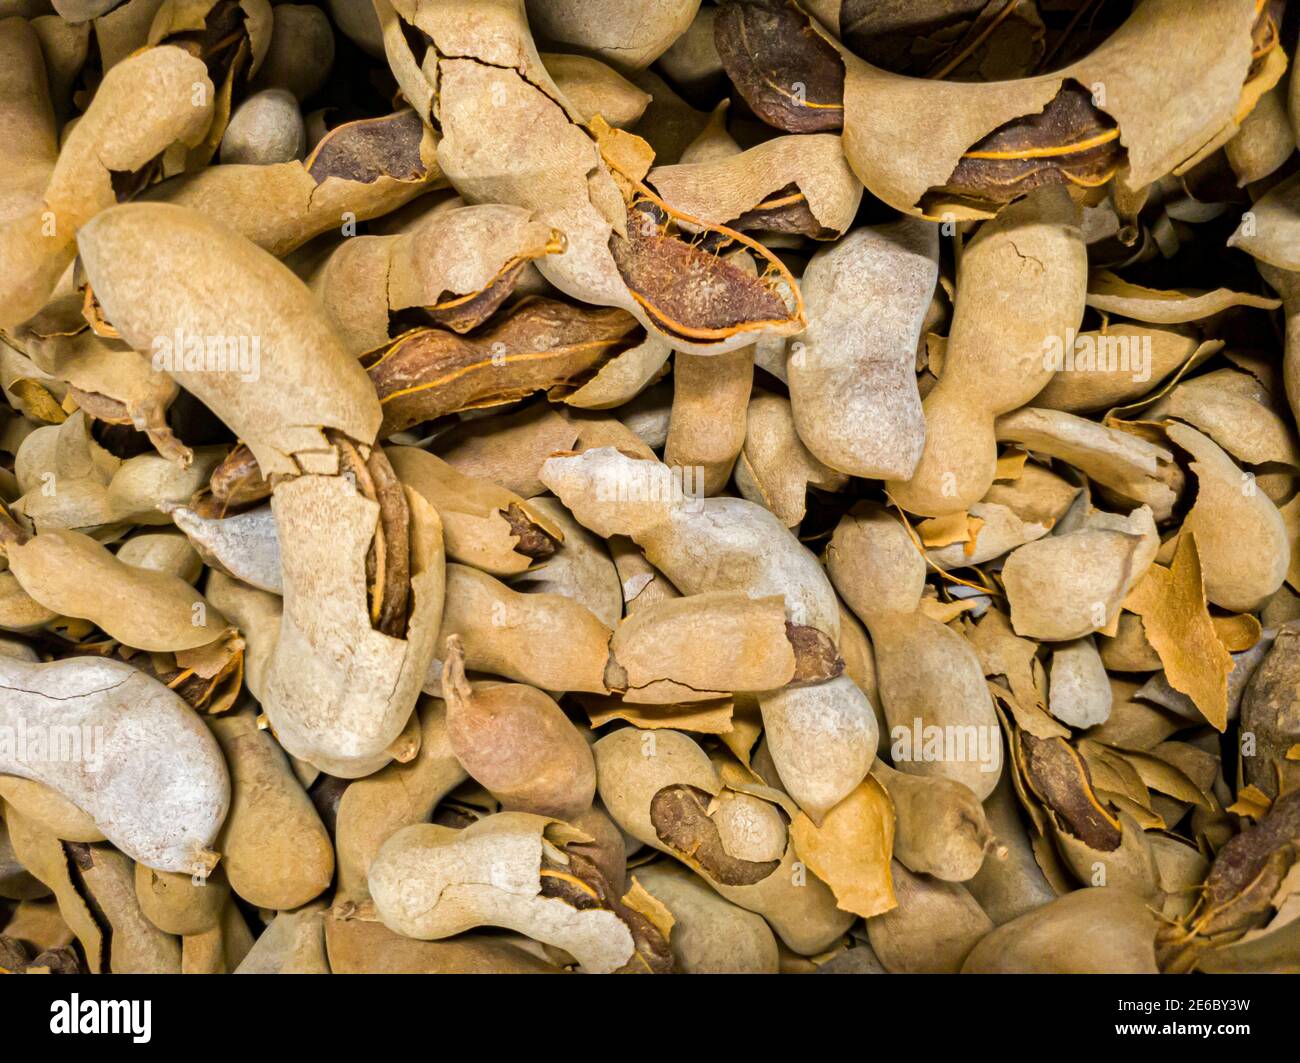 Close up image of dried raw fruits of tamarind tree (Tamarindus indica). A tropical leguminous tree with brown pod like fruits that grow in cultivated Stock Photo